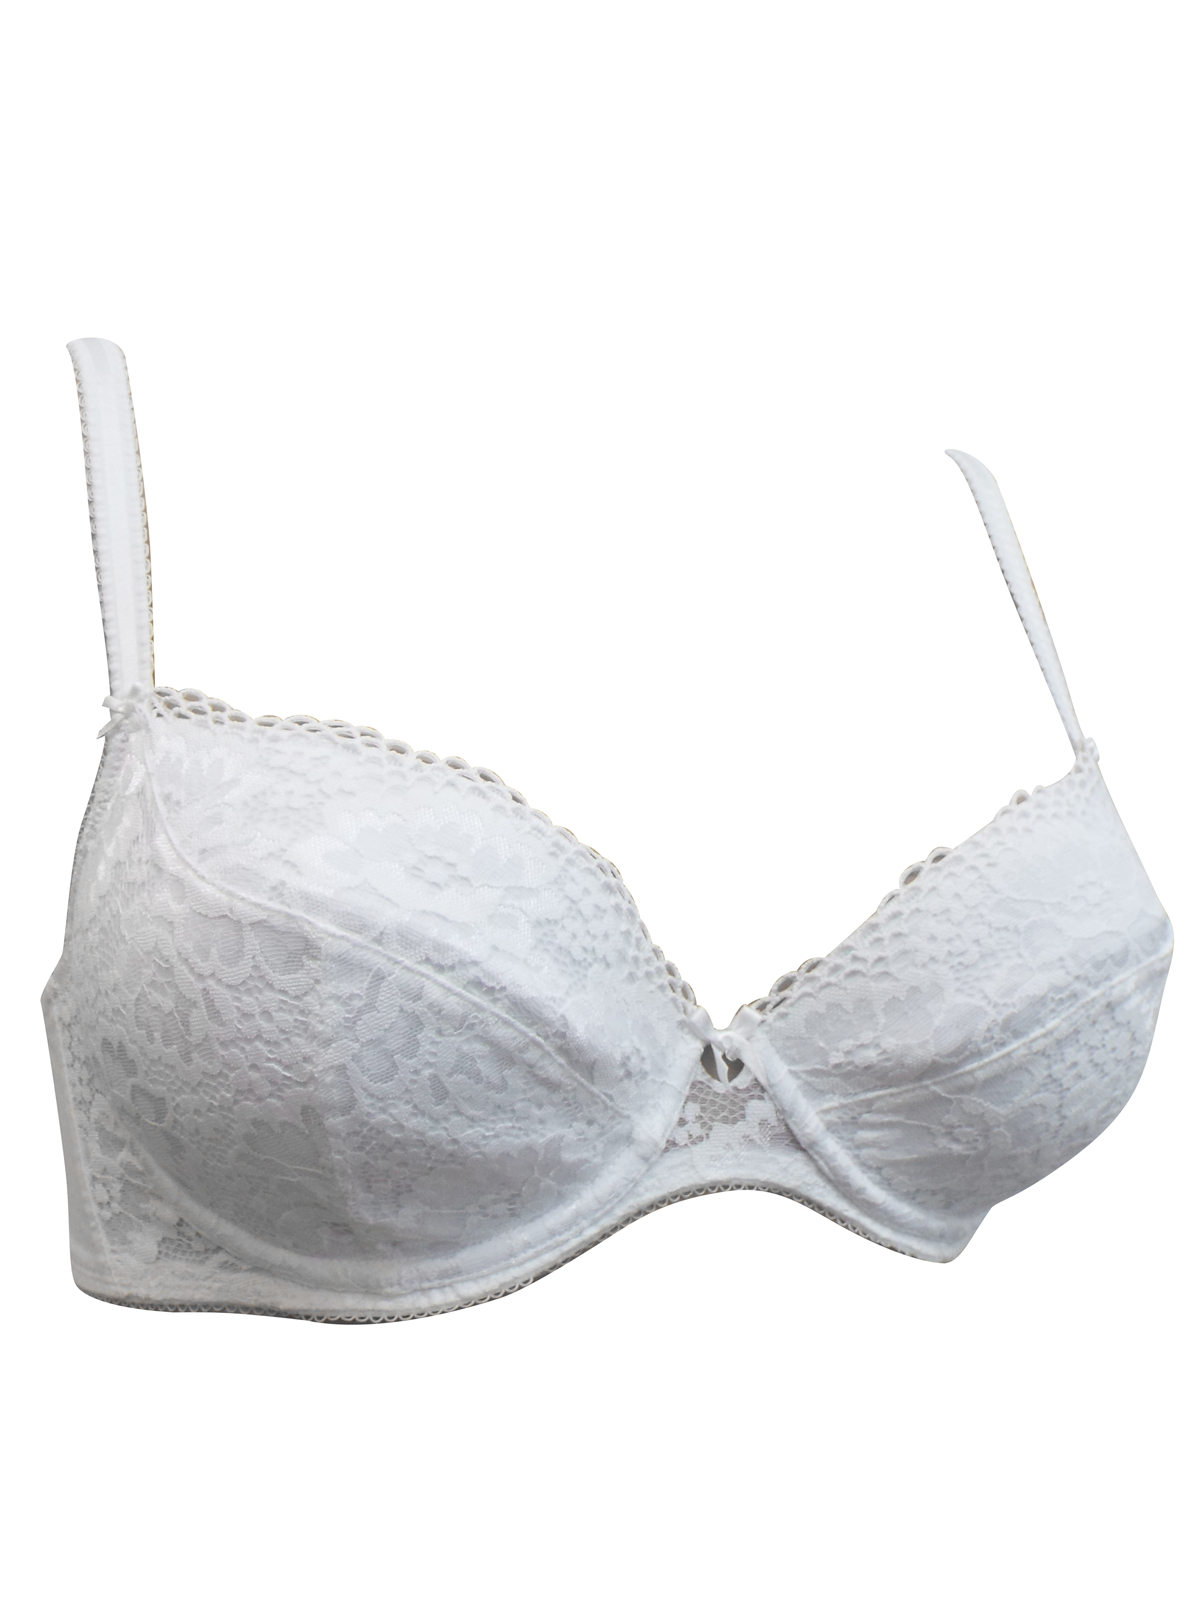 Marks and Spencer - - M&5 WHITE Scallop Lace Keyhole Wired Bra - Size ...